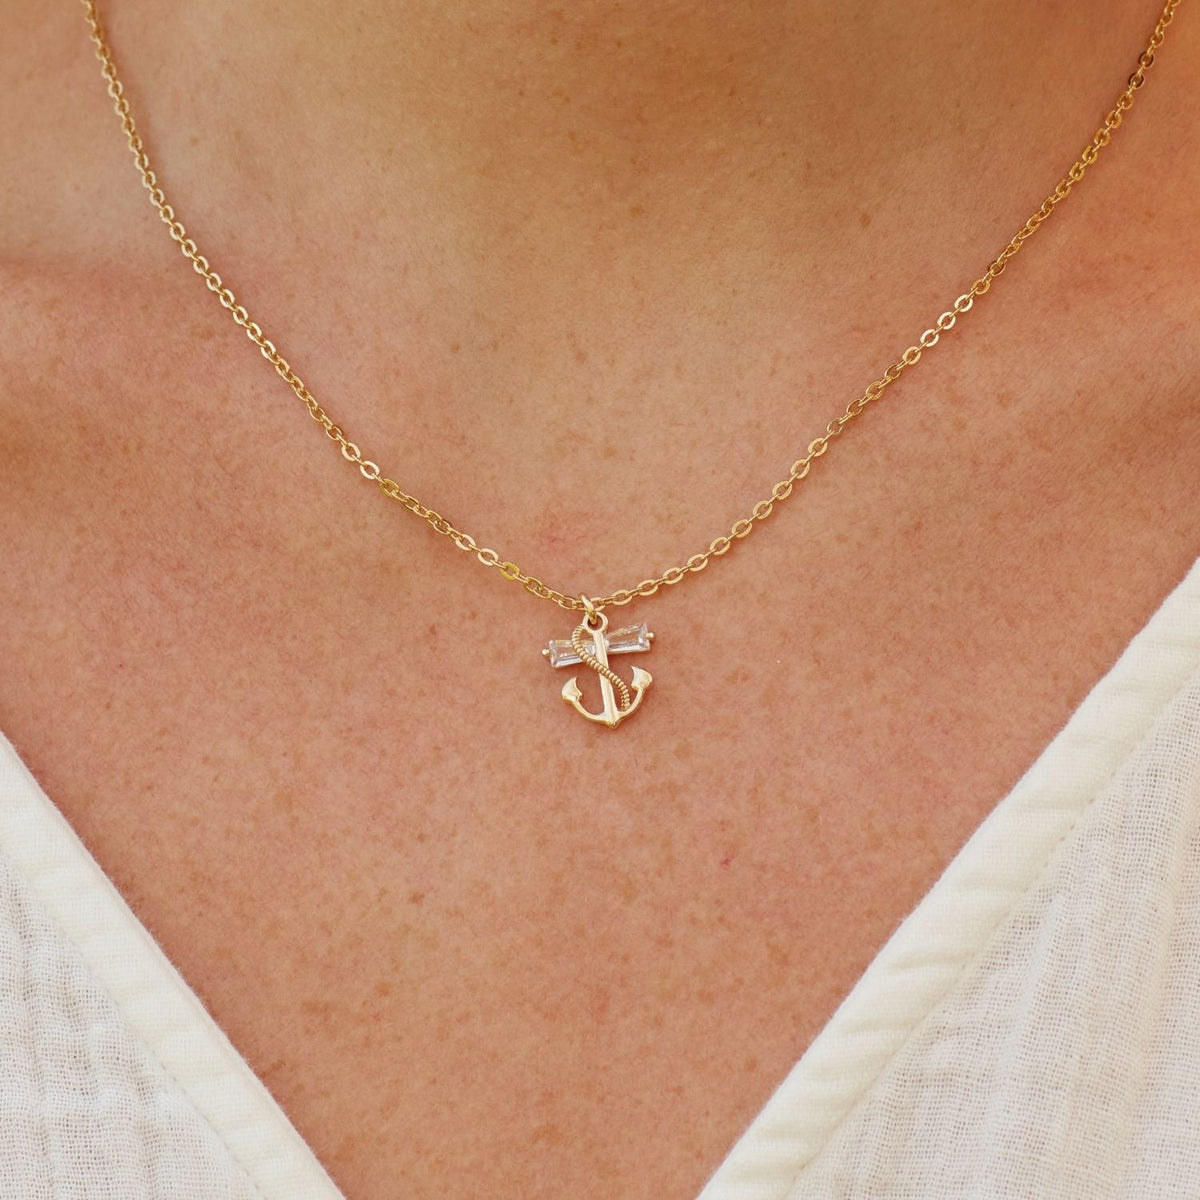 To The Mother of the Bride (From Groom) | Piece of Your Heart | Anchor Necklace